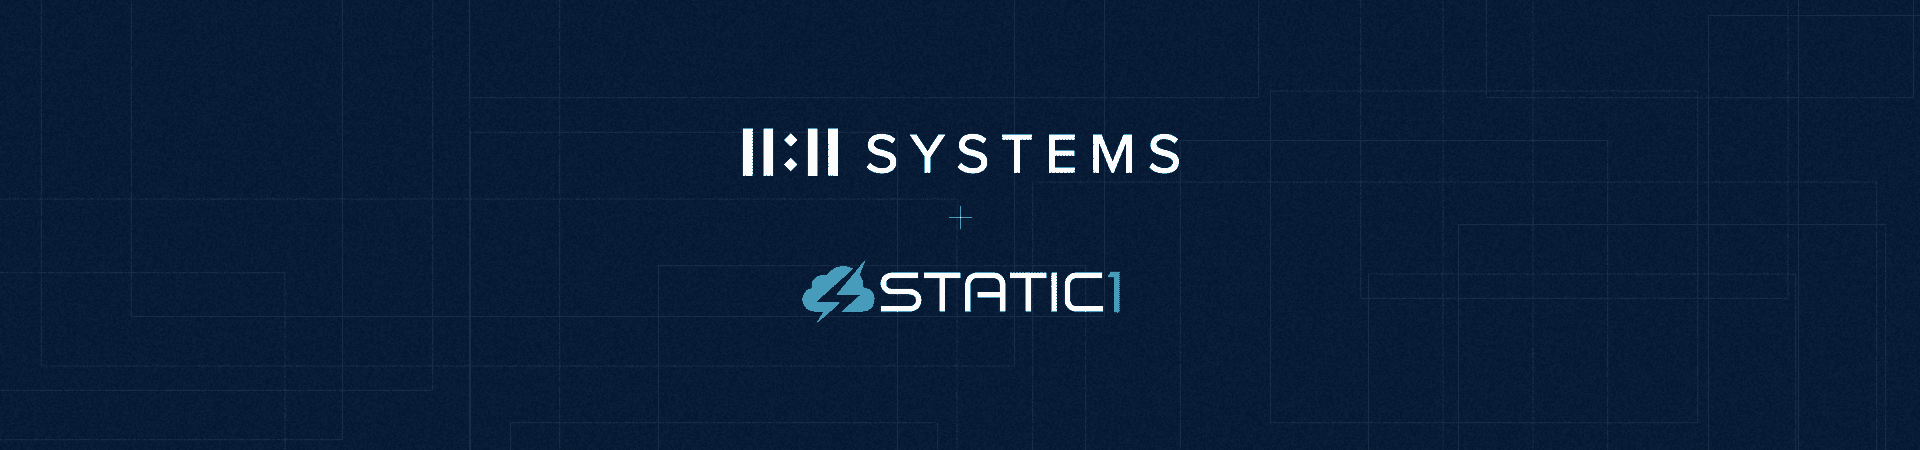 11:11 Systems Completes the Acquisition of Static1